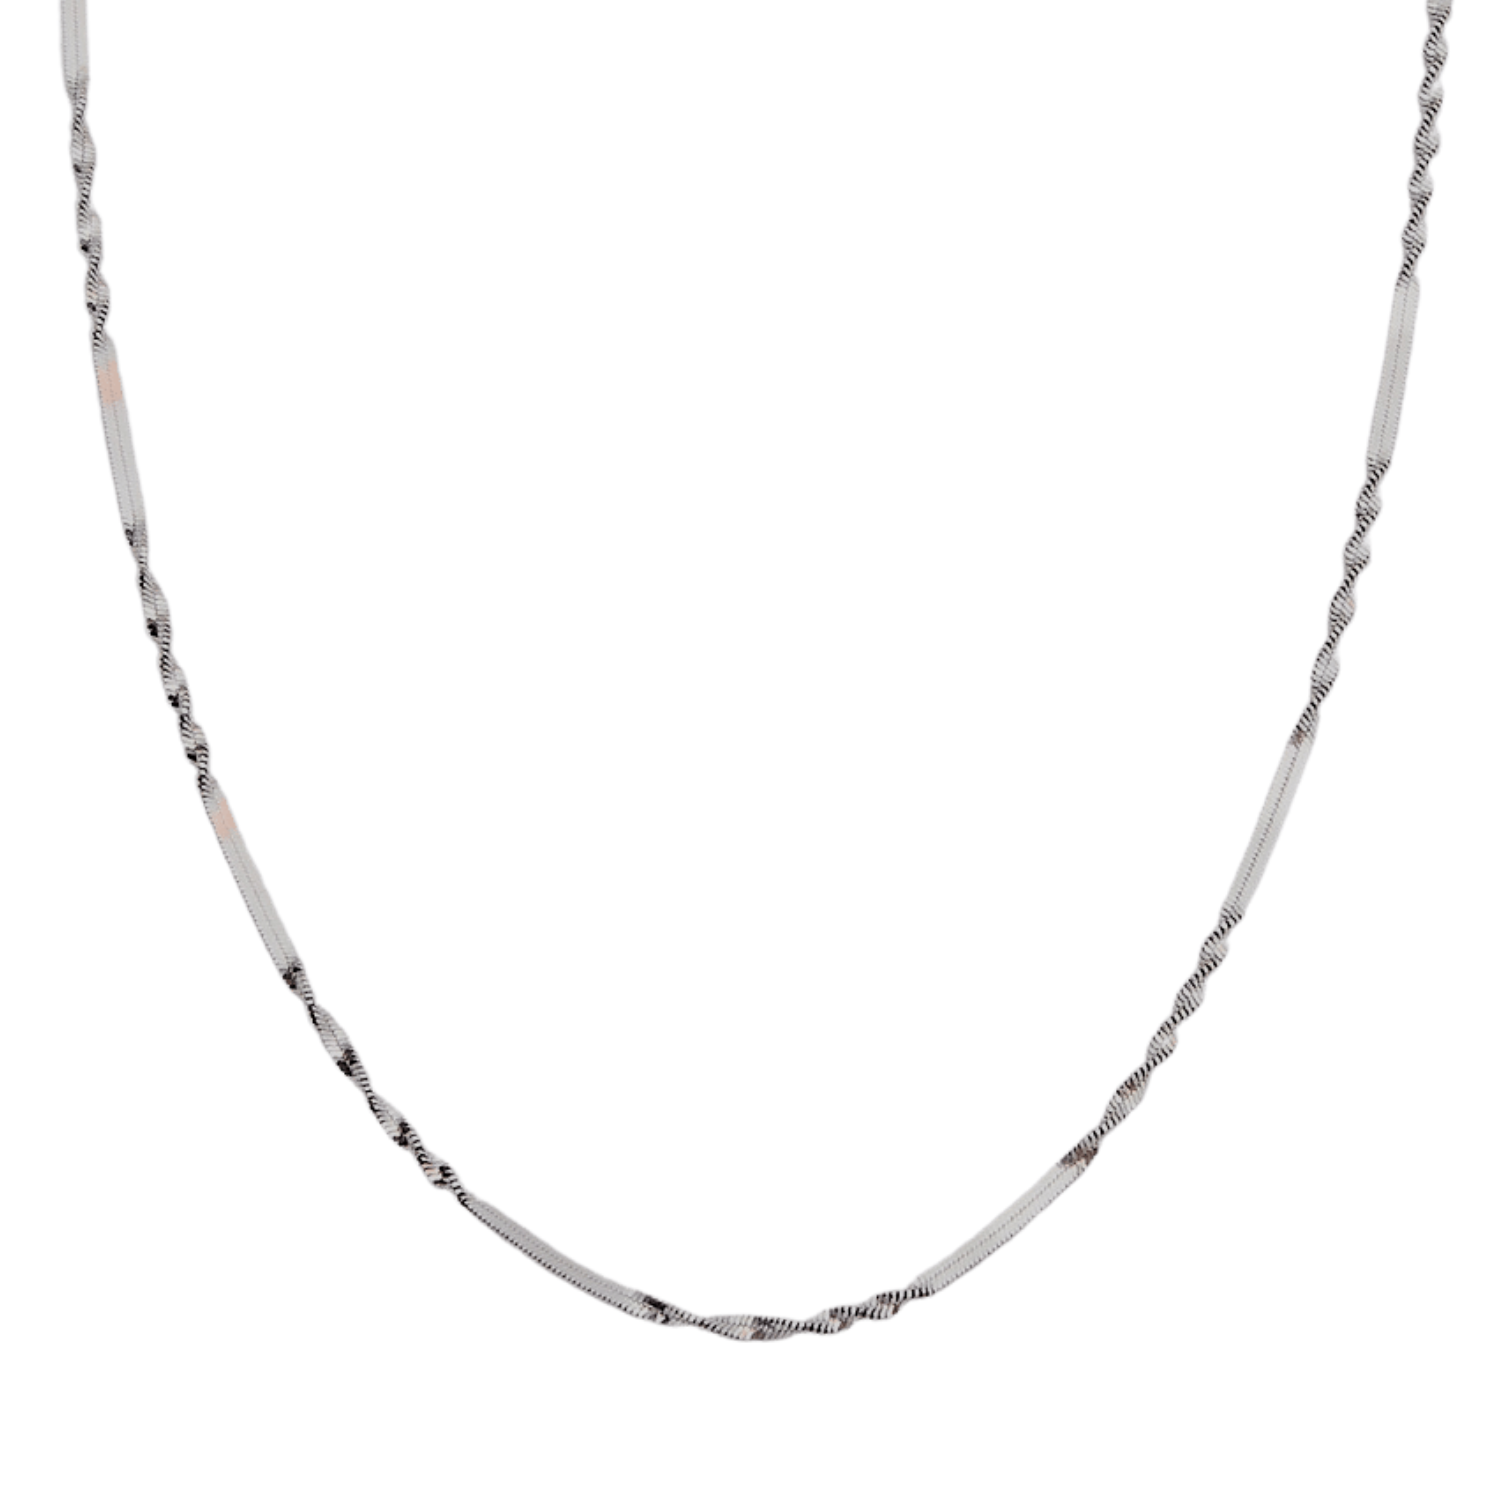 Half Twisted Sterling Silver Chain Necklace Singapore Chain